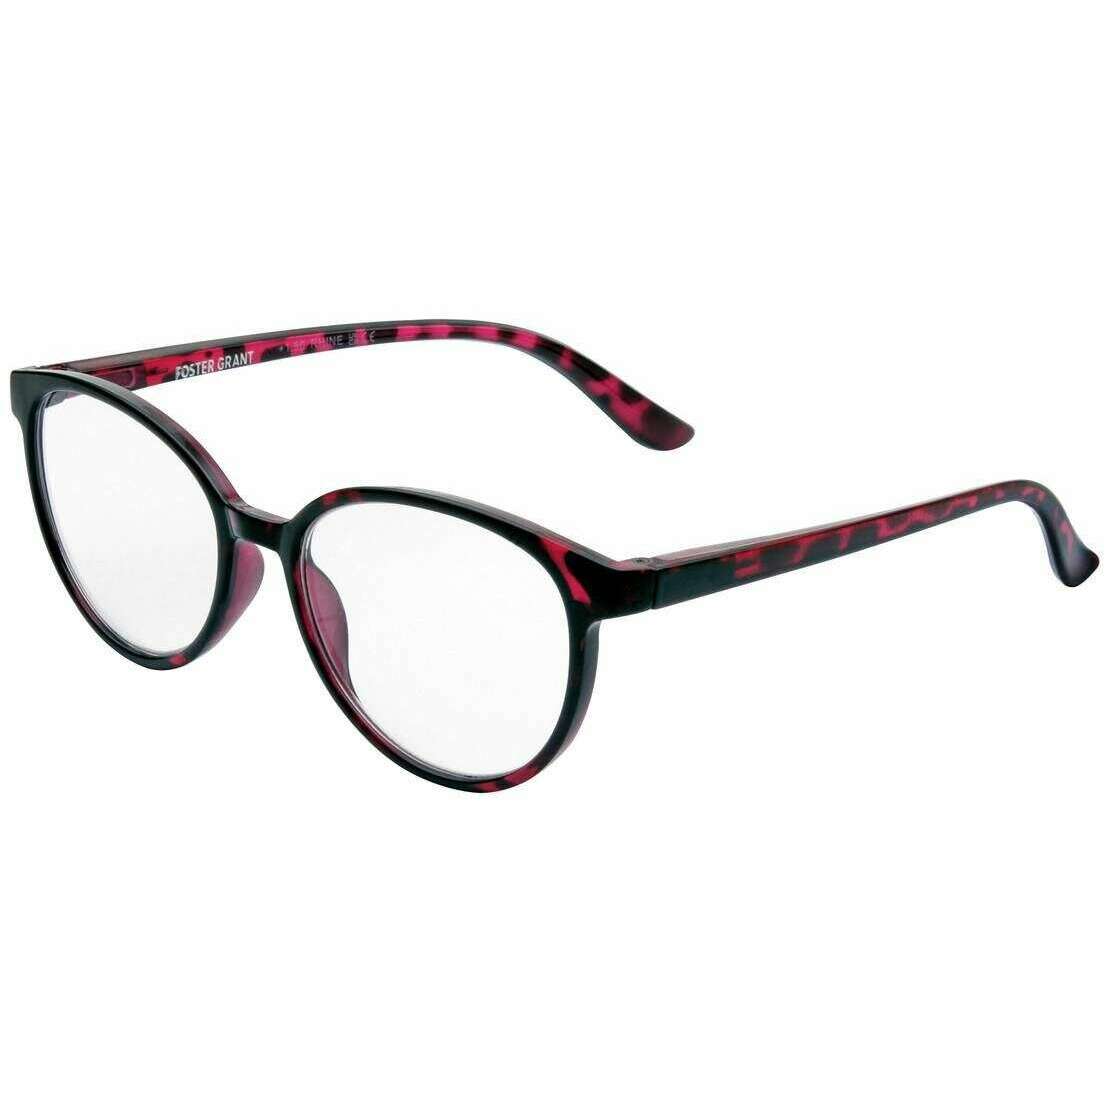 Foster Grant Rhine Reading Glasses - Magenta Pink Tortise Shell